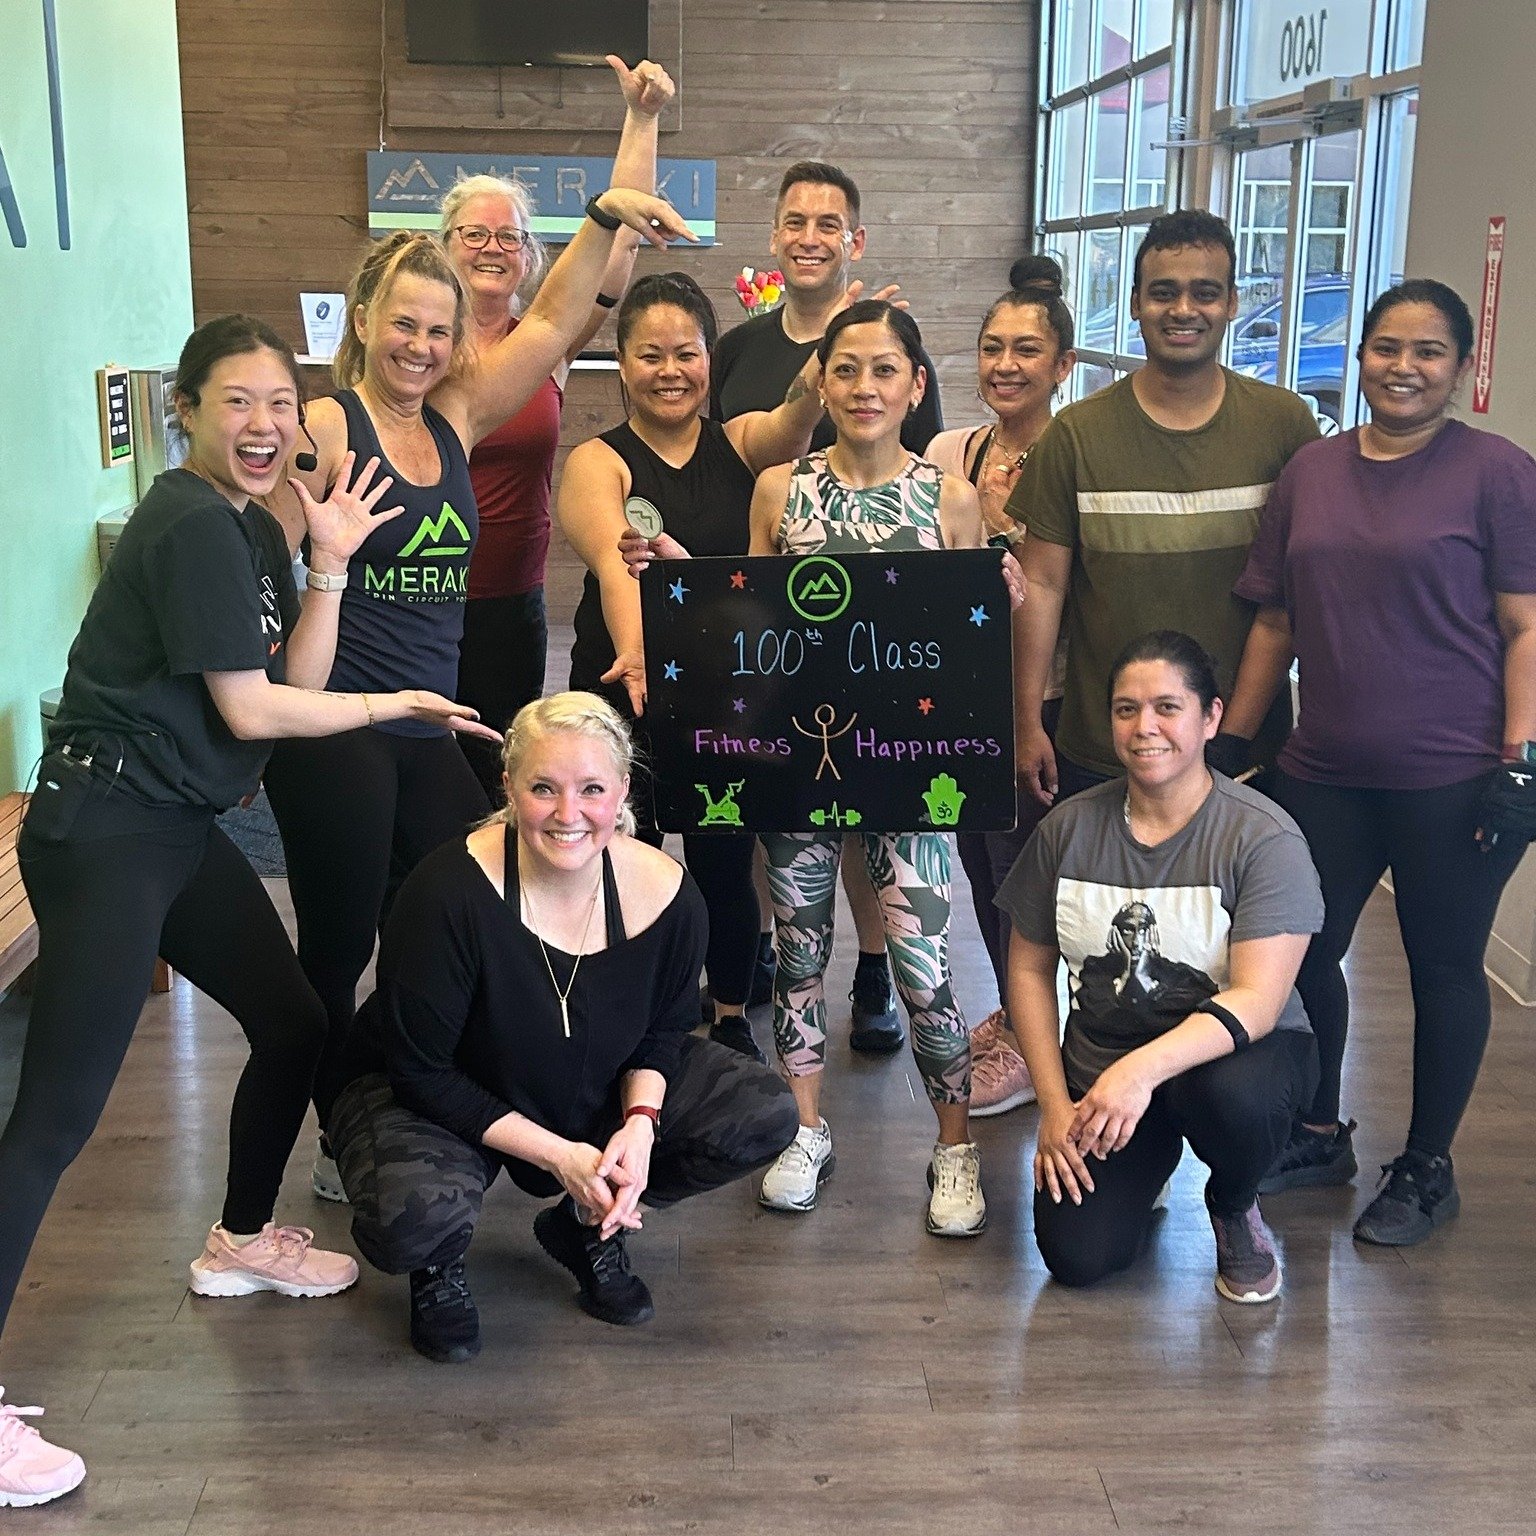 Congratulations to Rachel on her 100th class!  Keep crushing those workouts! Thank you for being a part of Meraki &amp; choosing us for your fitness journey - we appreciate you!